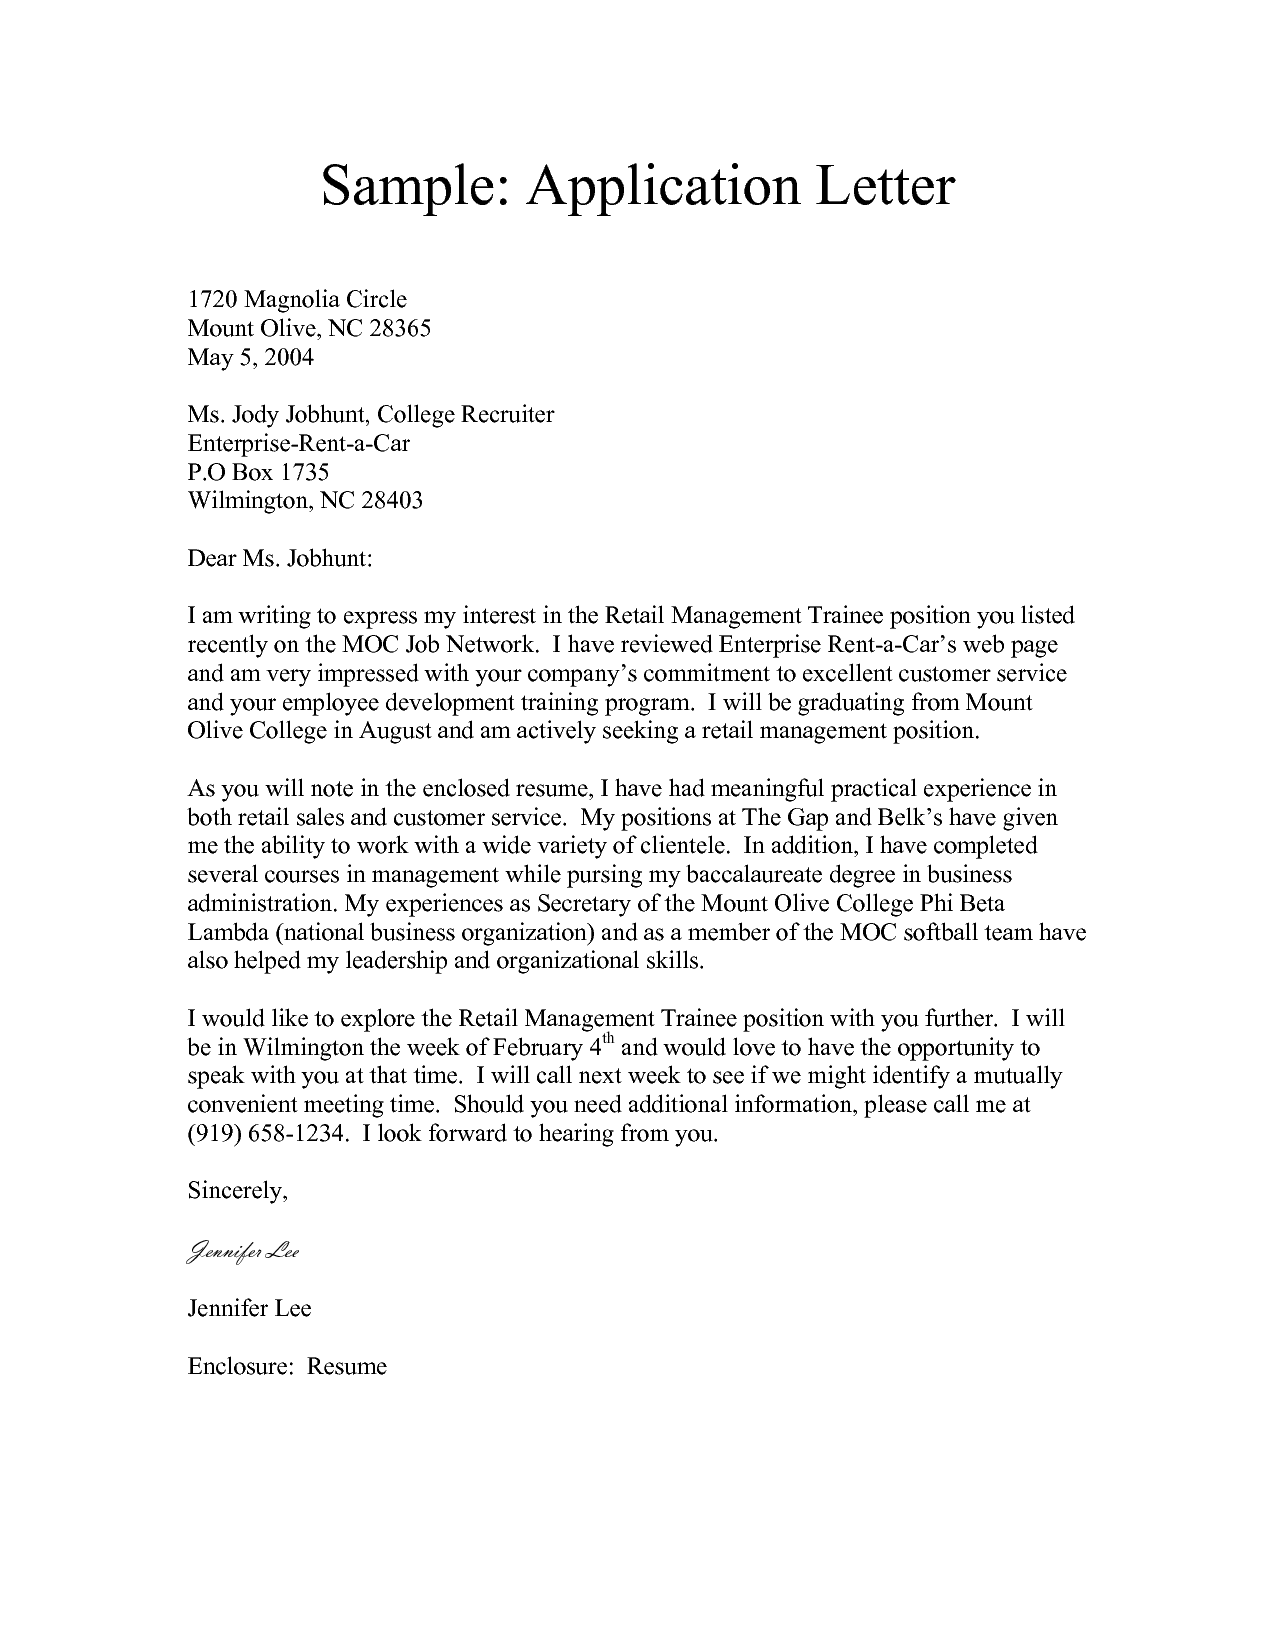 format to write application letter